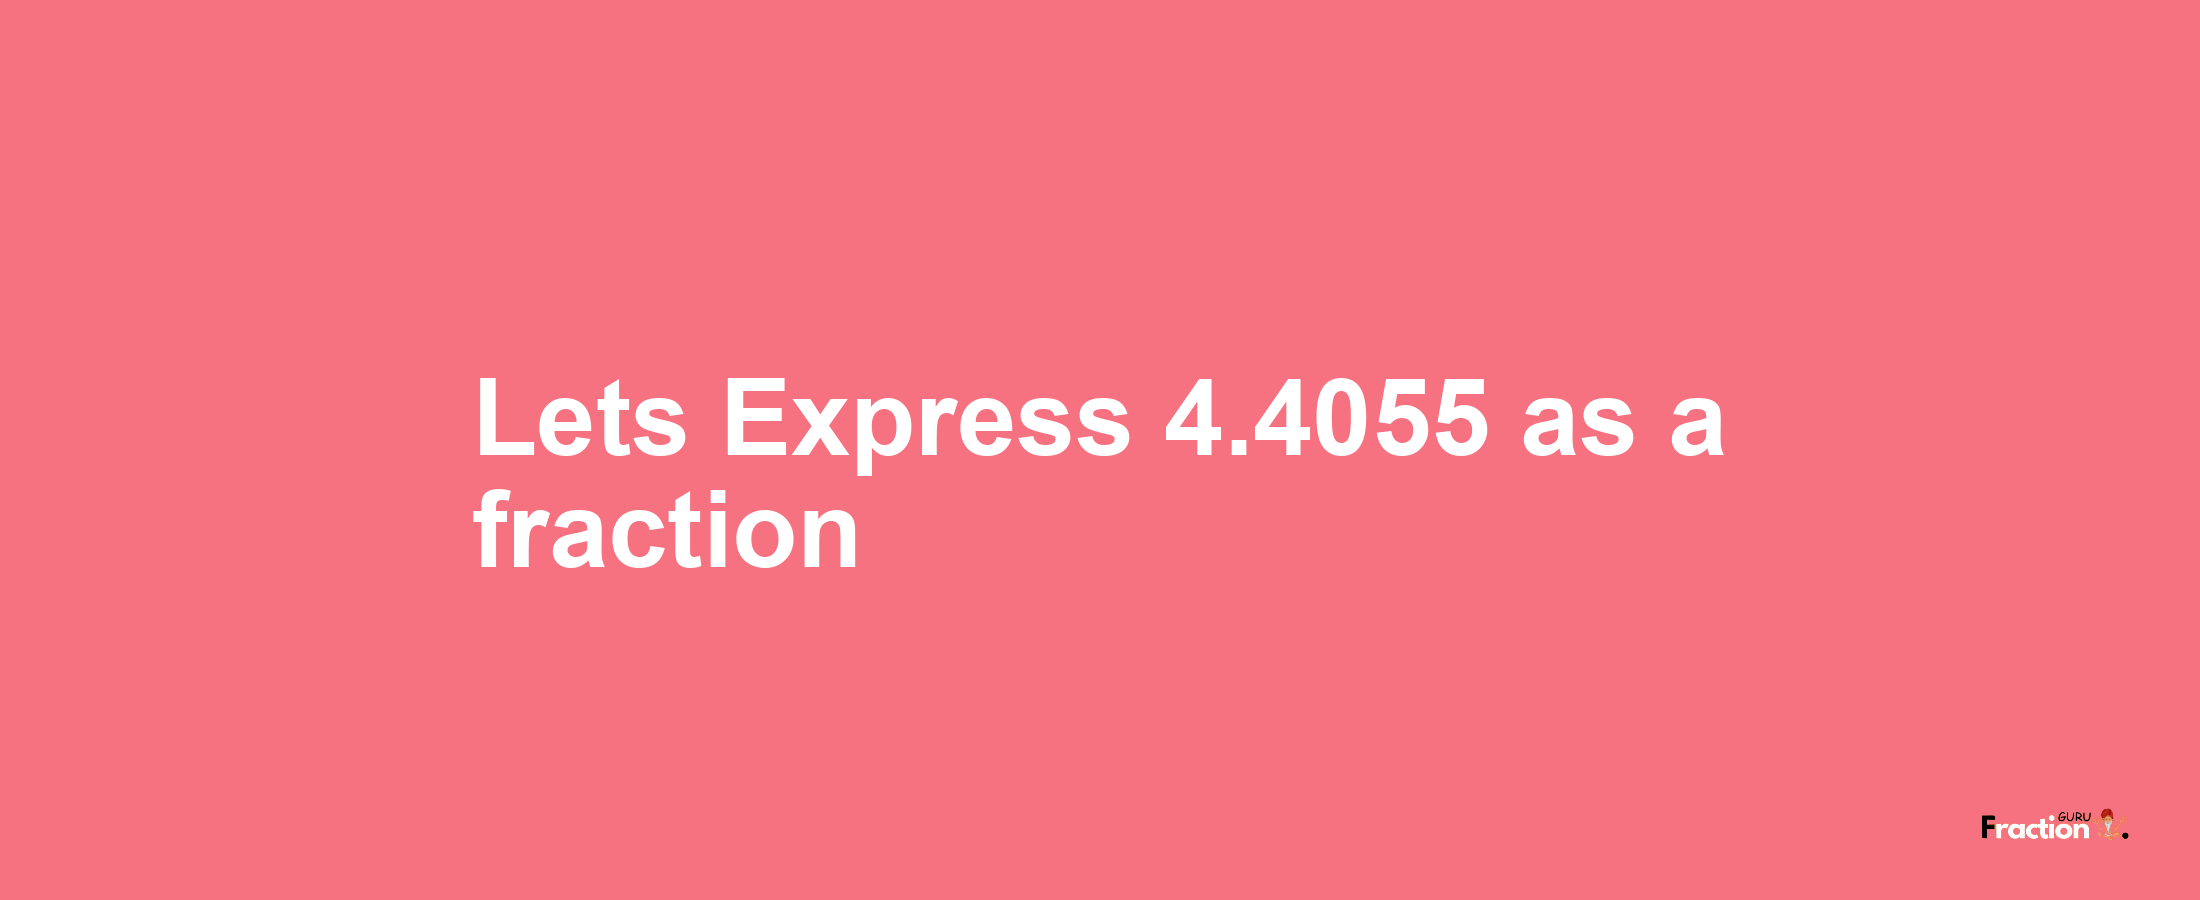 Lets Express 4.4055 as afraction